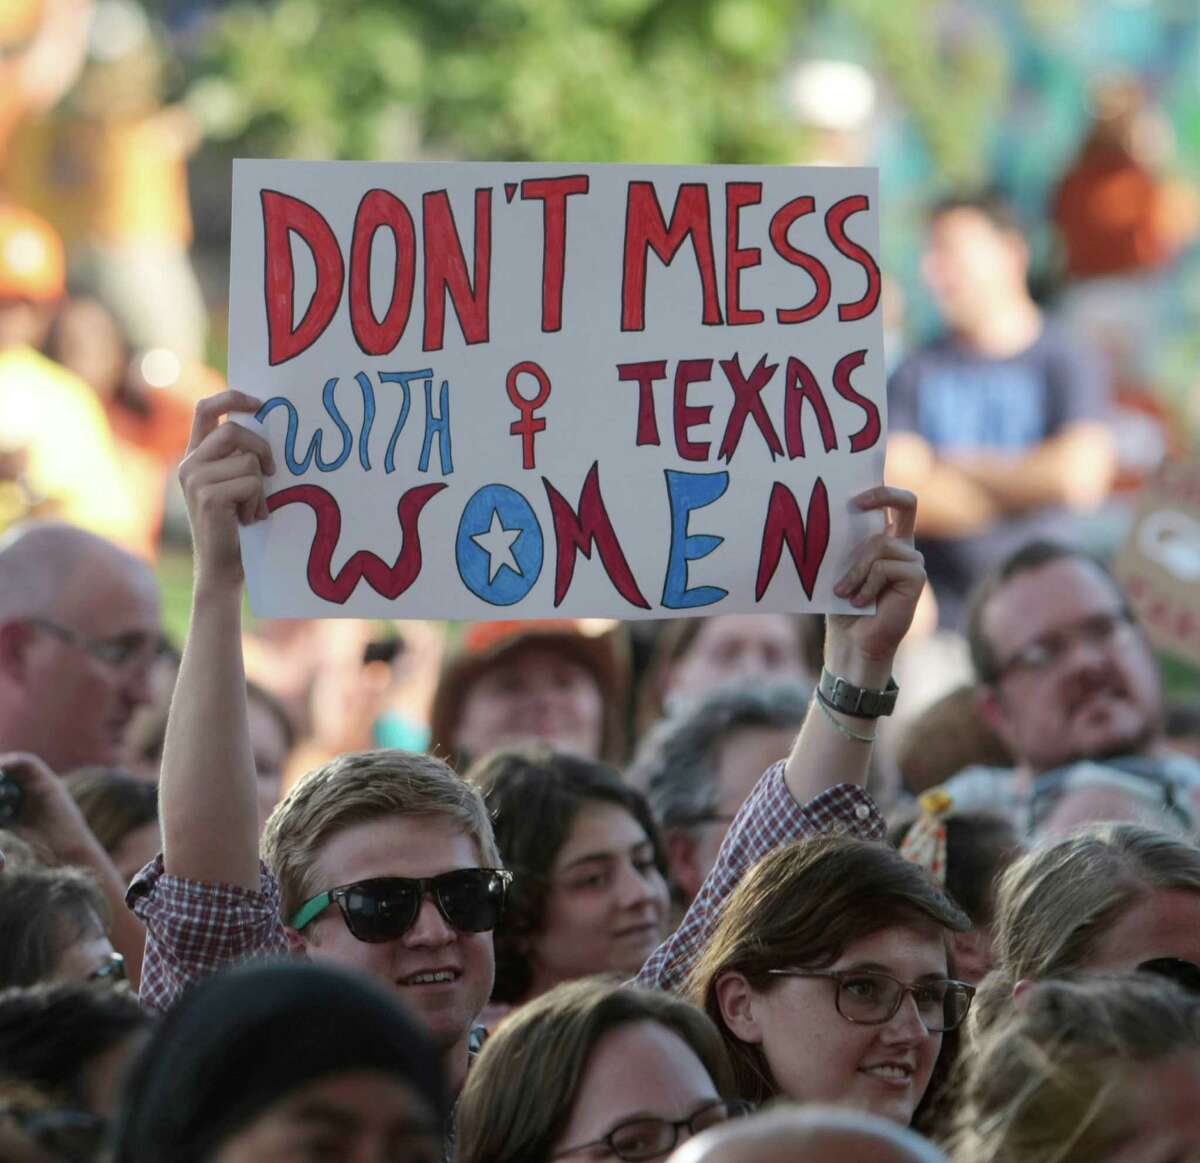 A protester holds up a sign during the Planned Parenthood Action Fund's Stand with Texas Women Rally at Discovery Green in Houston in 2013. The rally challenged an abortion restriction bill.